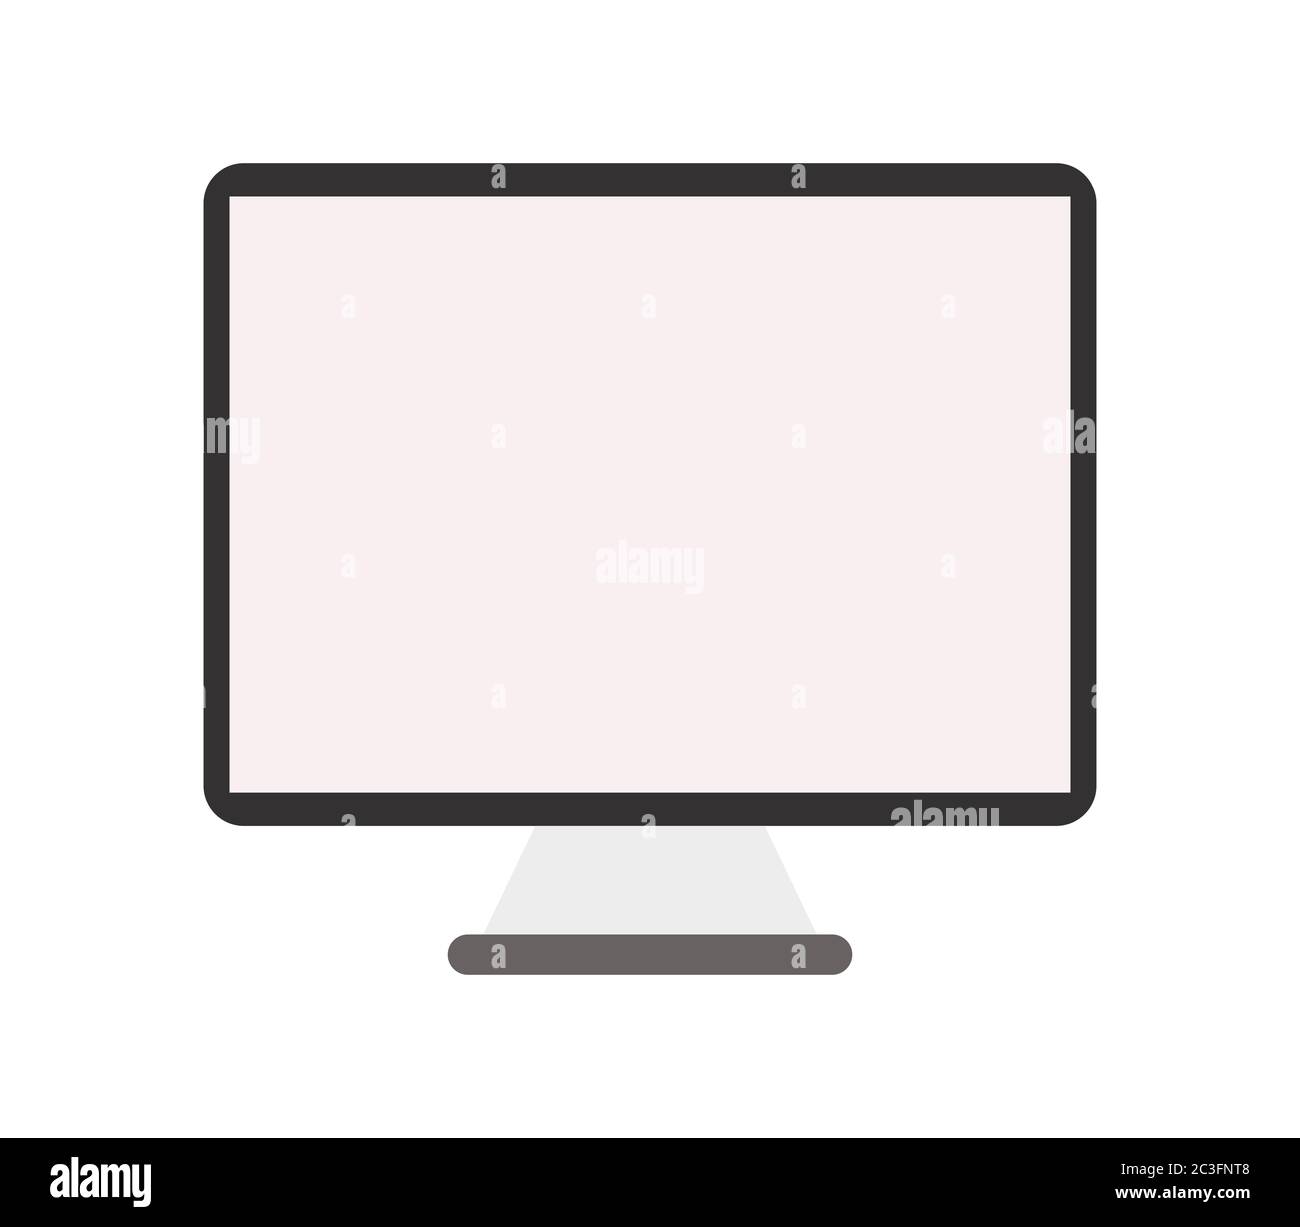 computer monitor icon illustrated in vector on white background Stock Photo